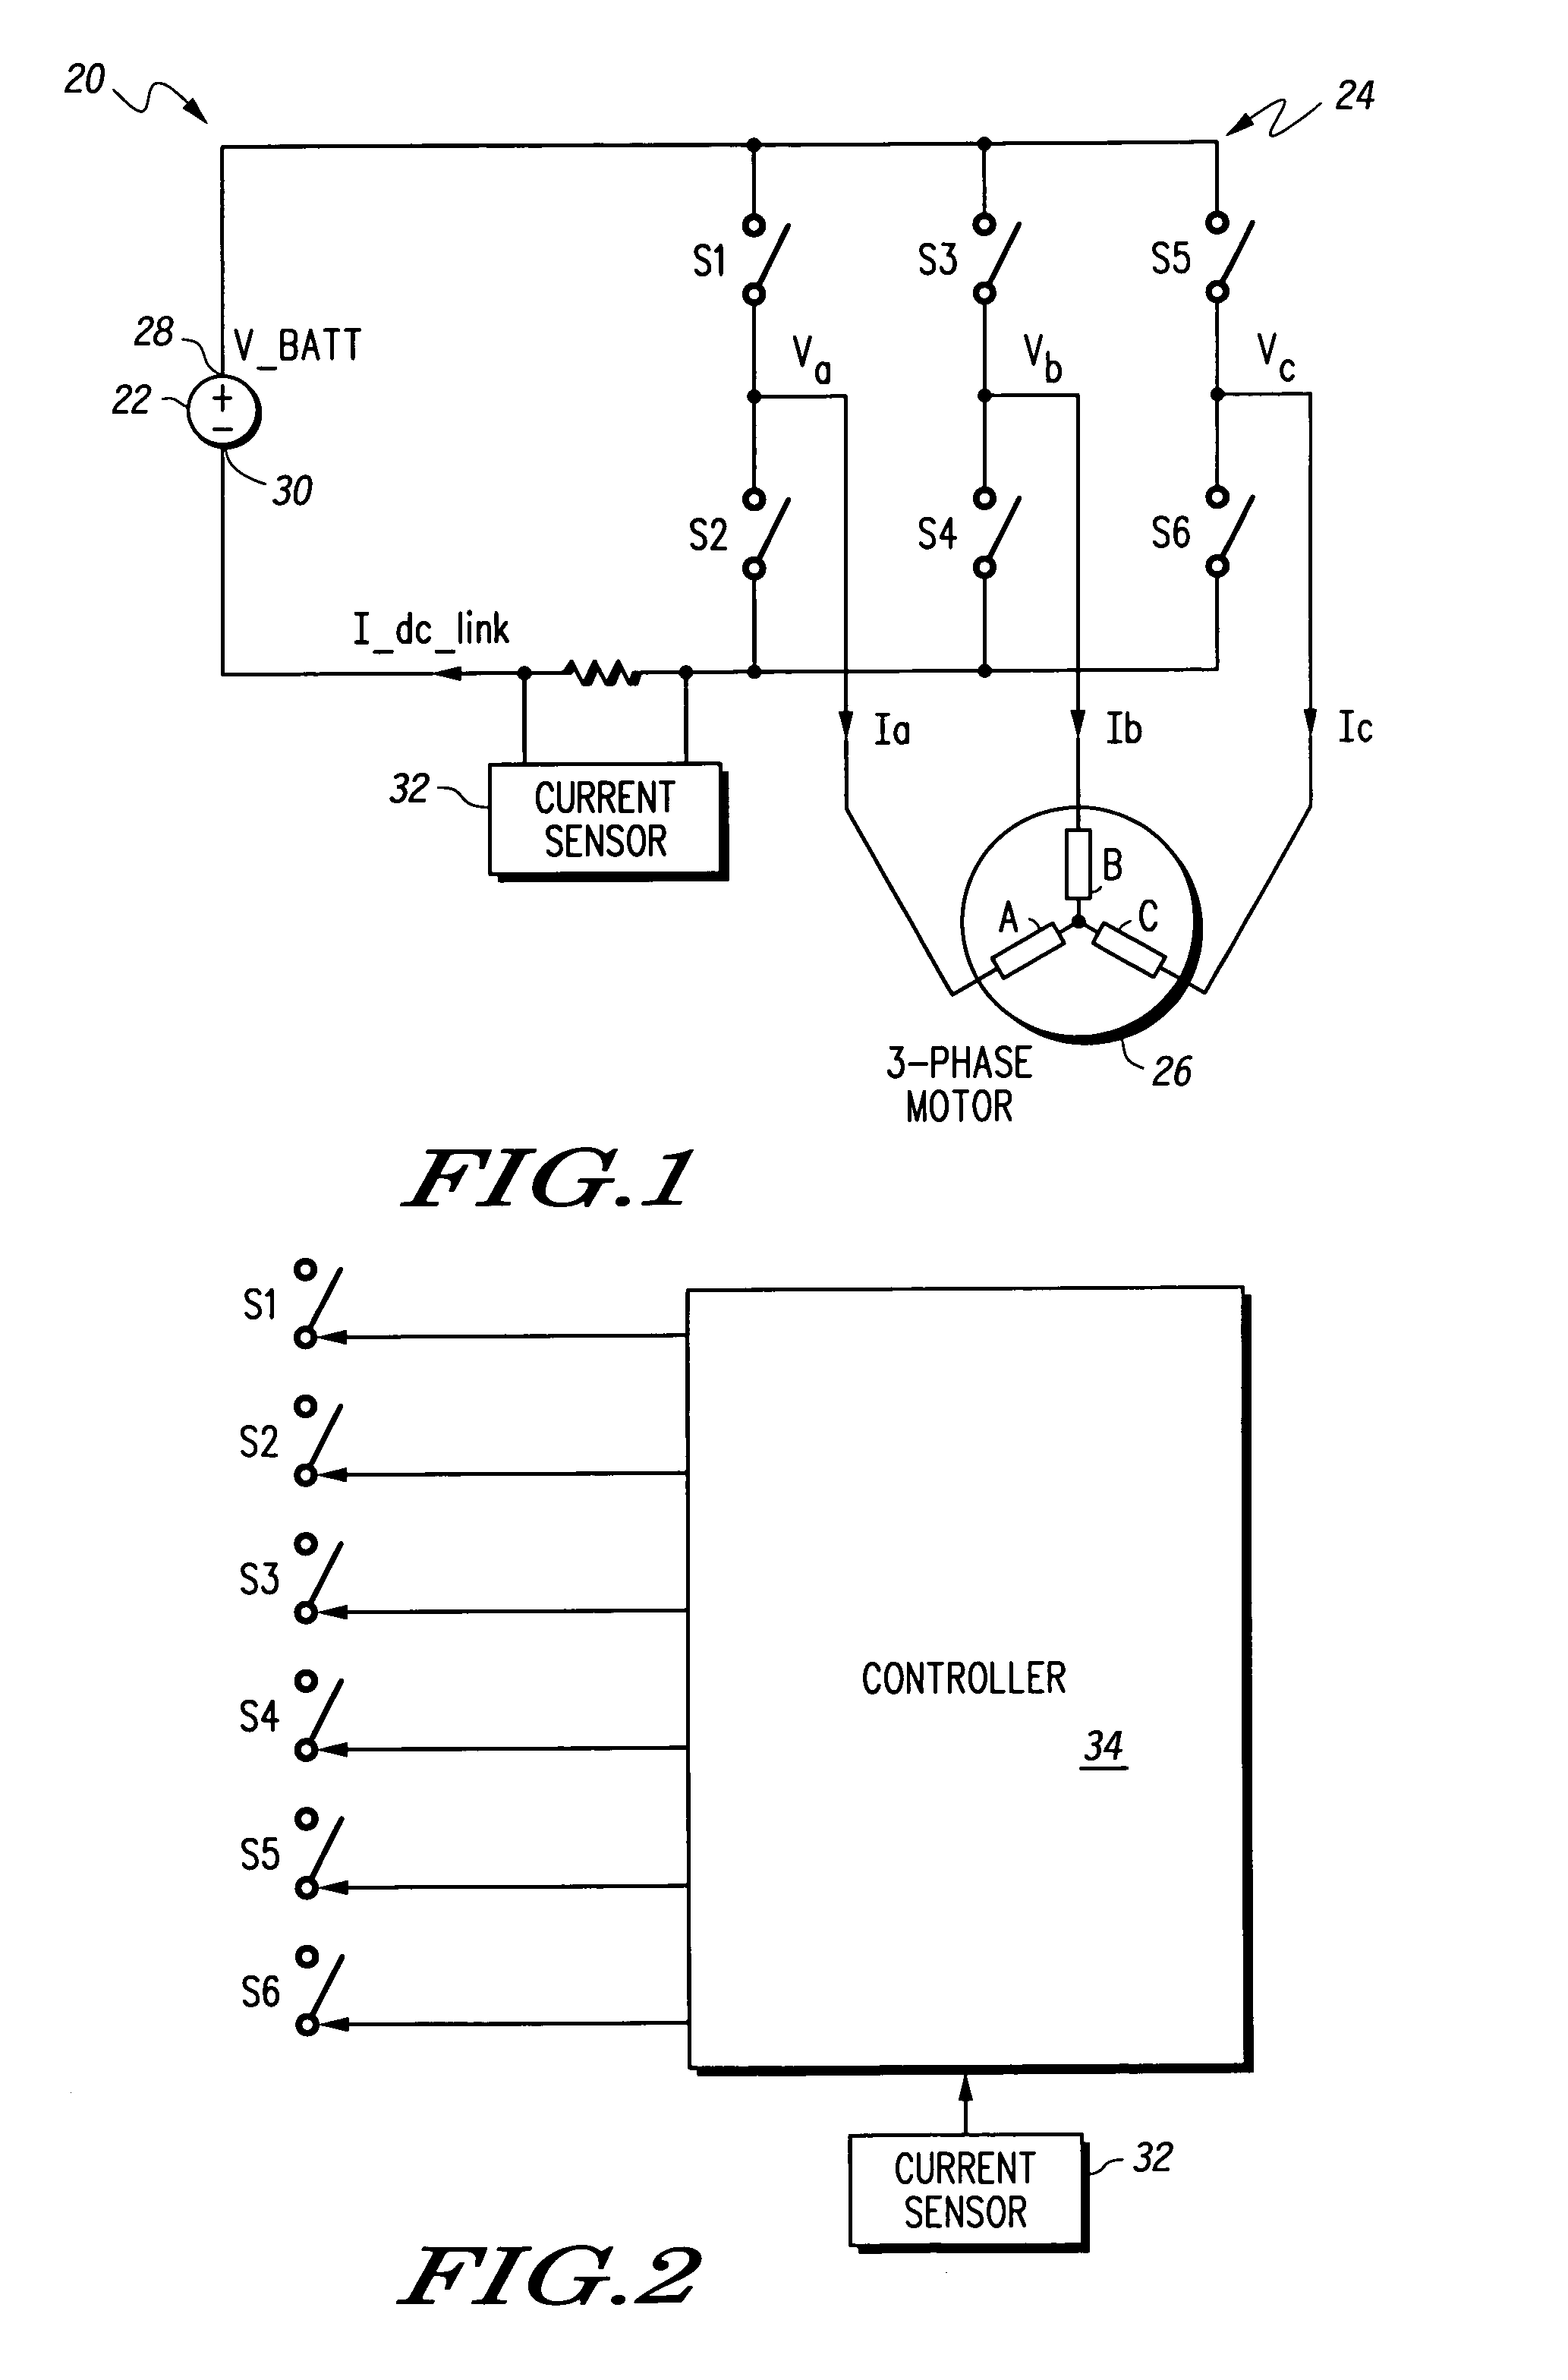 Damping control in a three-phase motor with a single current sensor